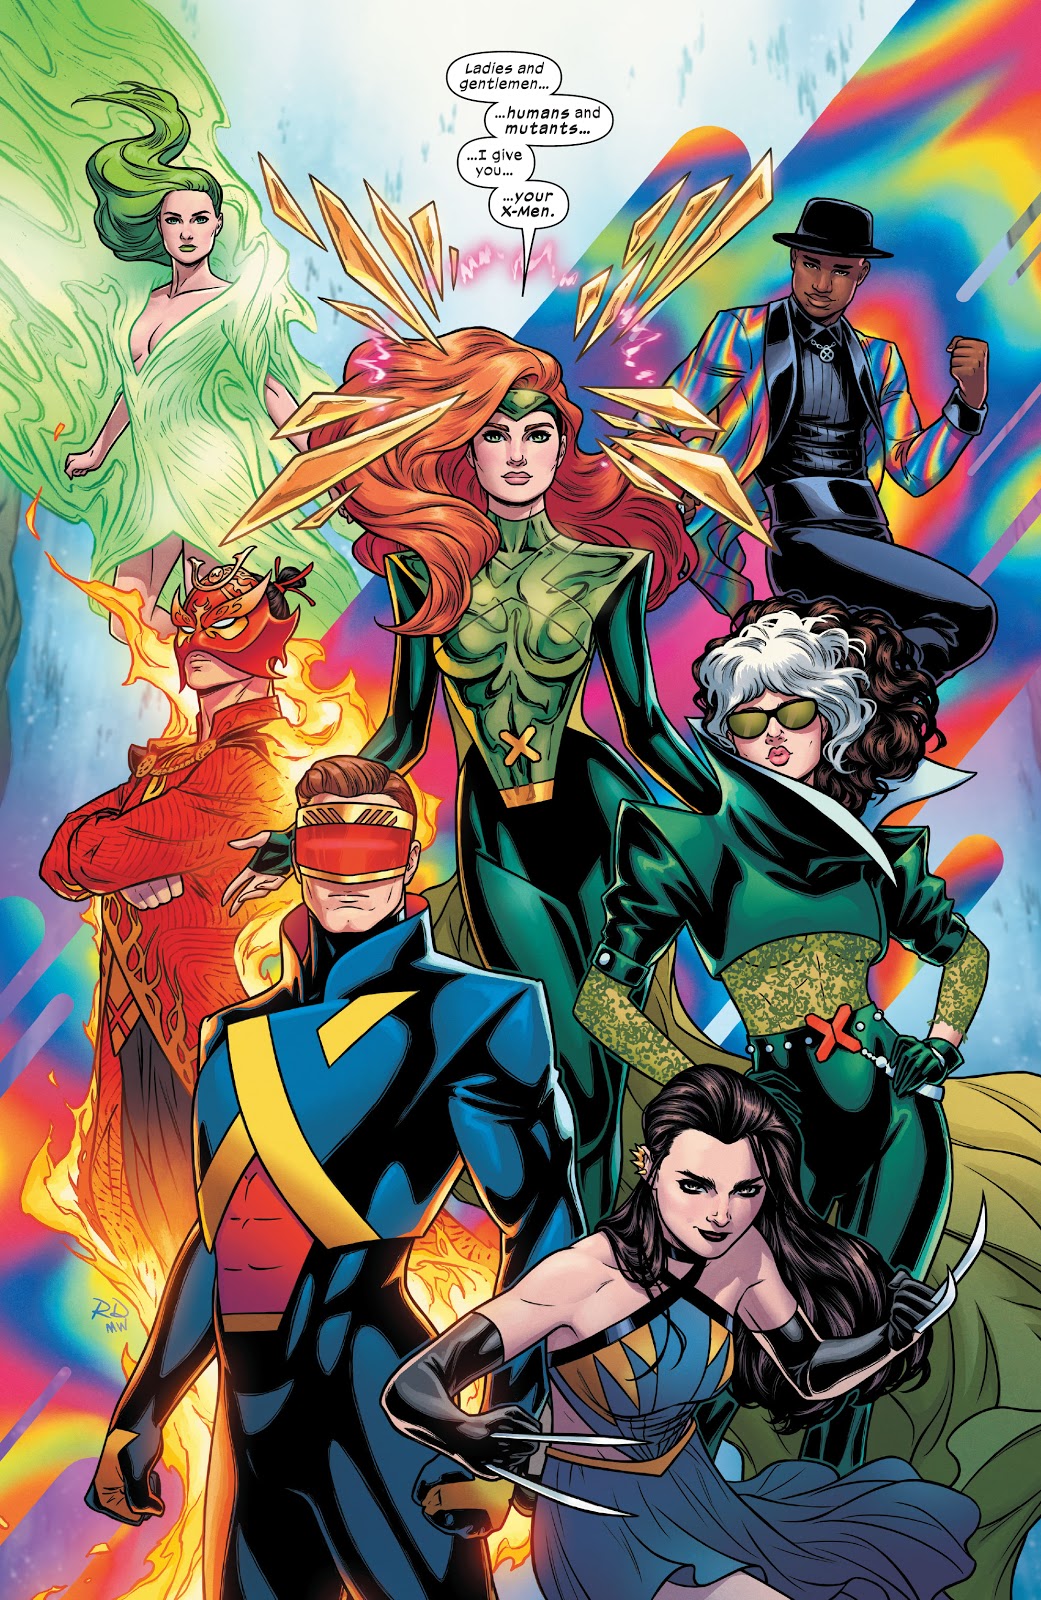 Jean Grey introduces the rest of the X-Men, consisting of Cyclops, Rogue, Laura Kinney/X-23/Wolverine, Sunfire, Polaris, and Synch, in X-Men #21, (2021).